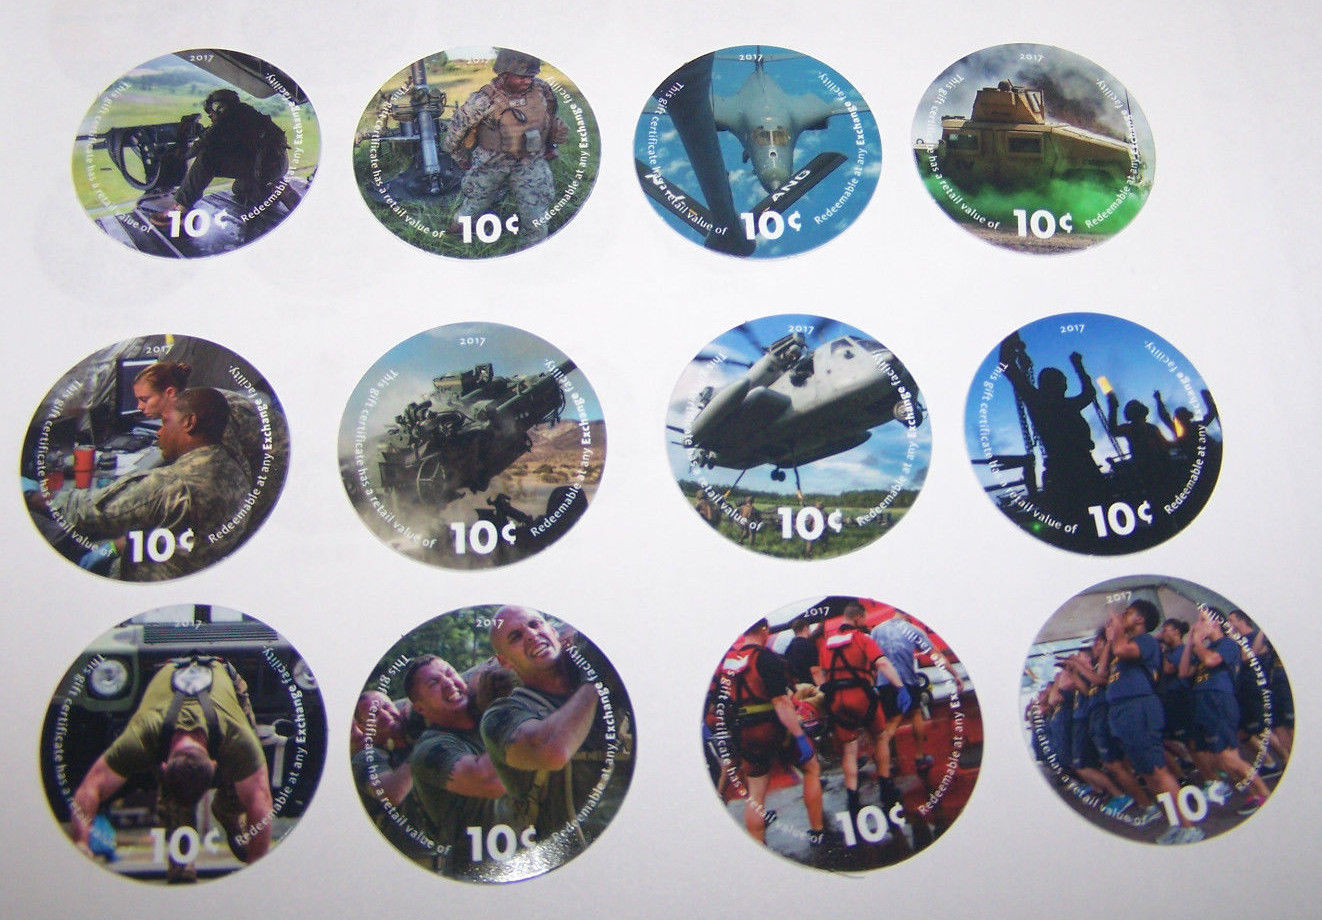 Details about   16th Aafes Pogs 25c 16G25 RARE from 2017 Mint New MPCs Iraq short print No Date 